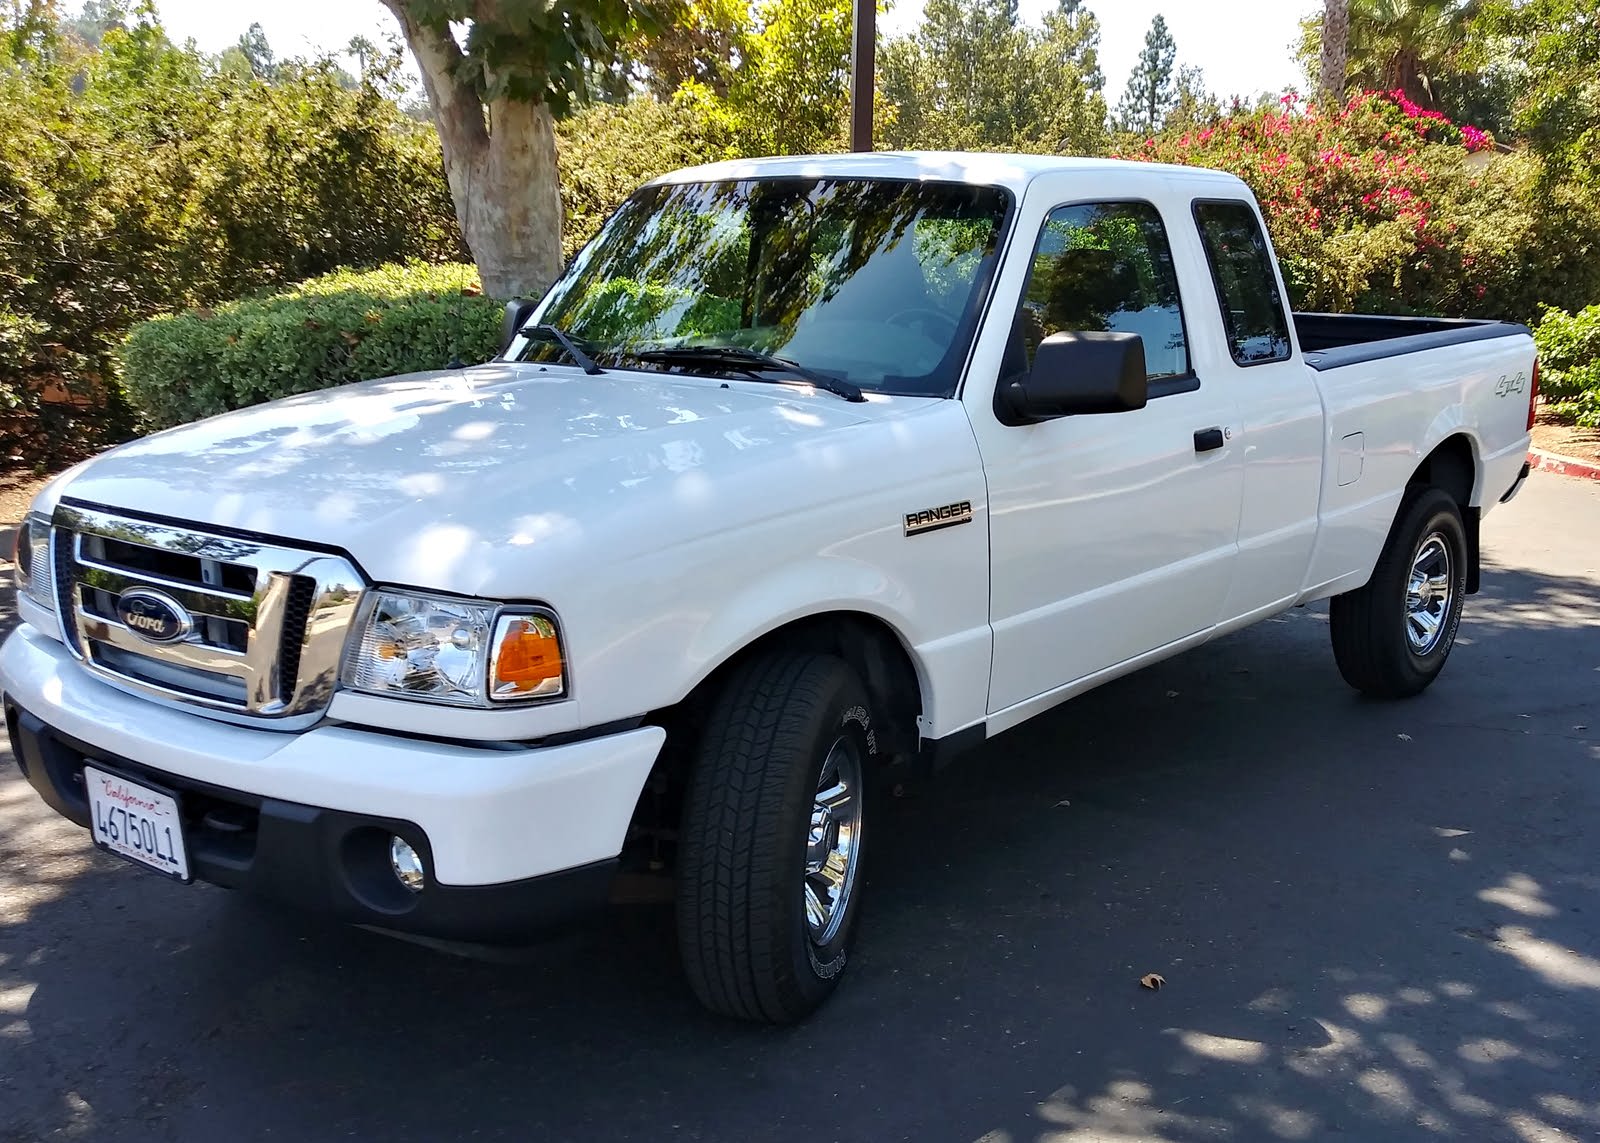 2008 Ford Ranger: Prices, Reviews & Pictures - CarGurus